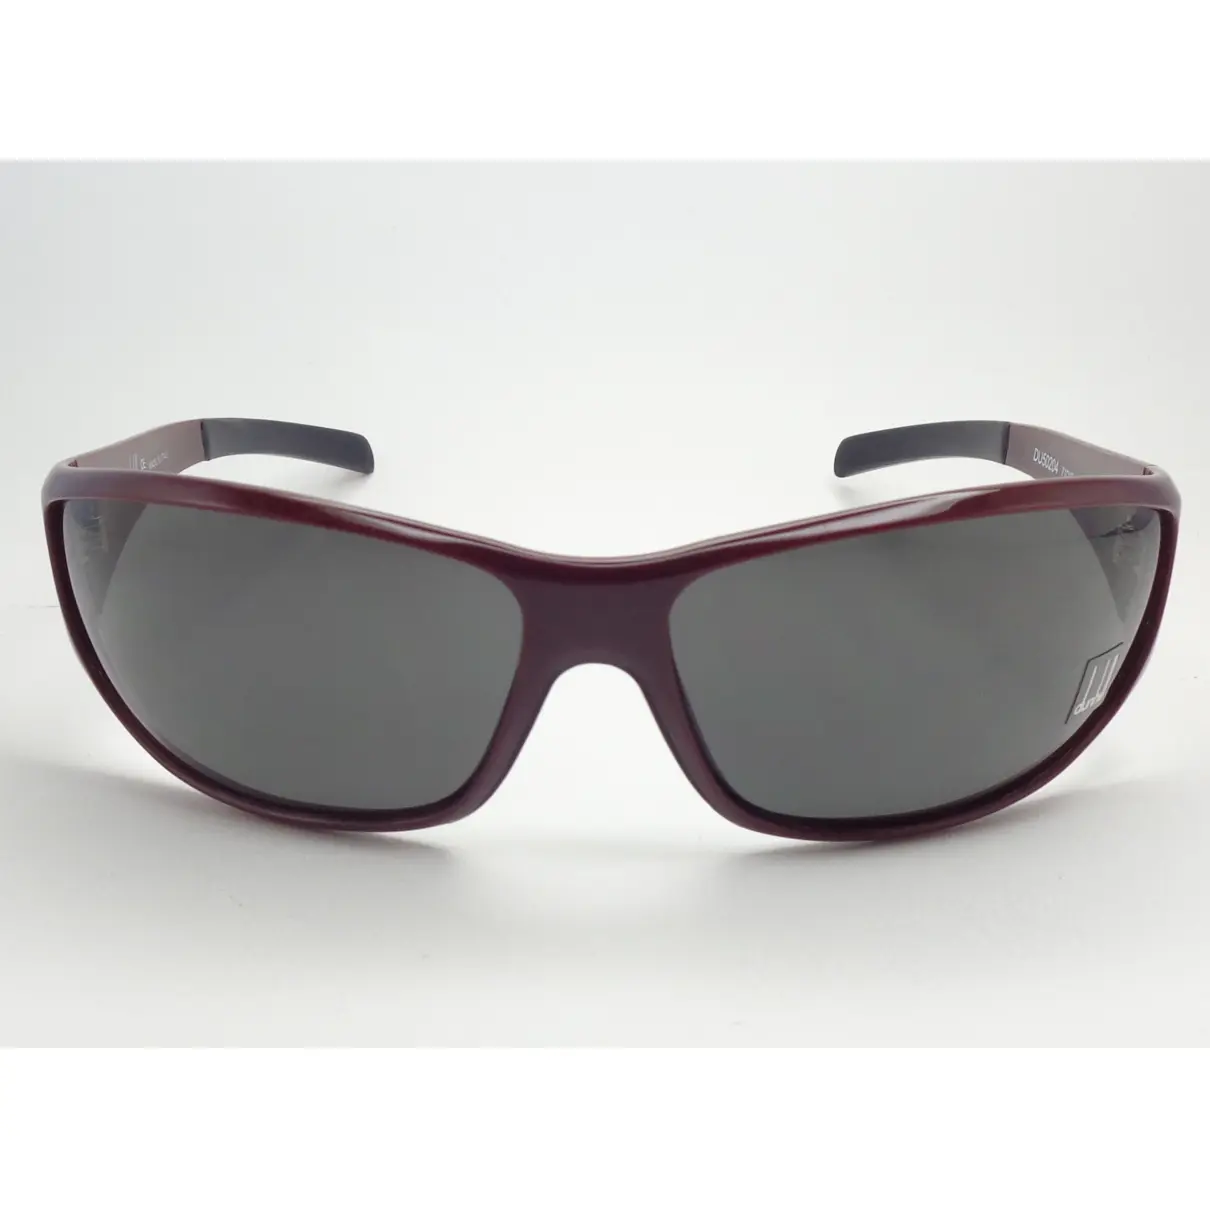 Sunglasses Alfred Dunhill